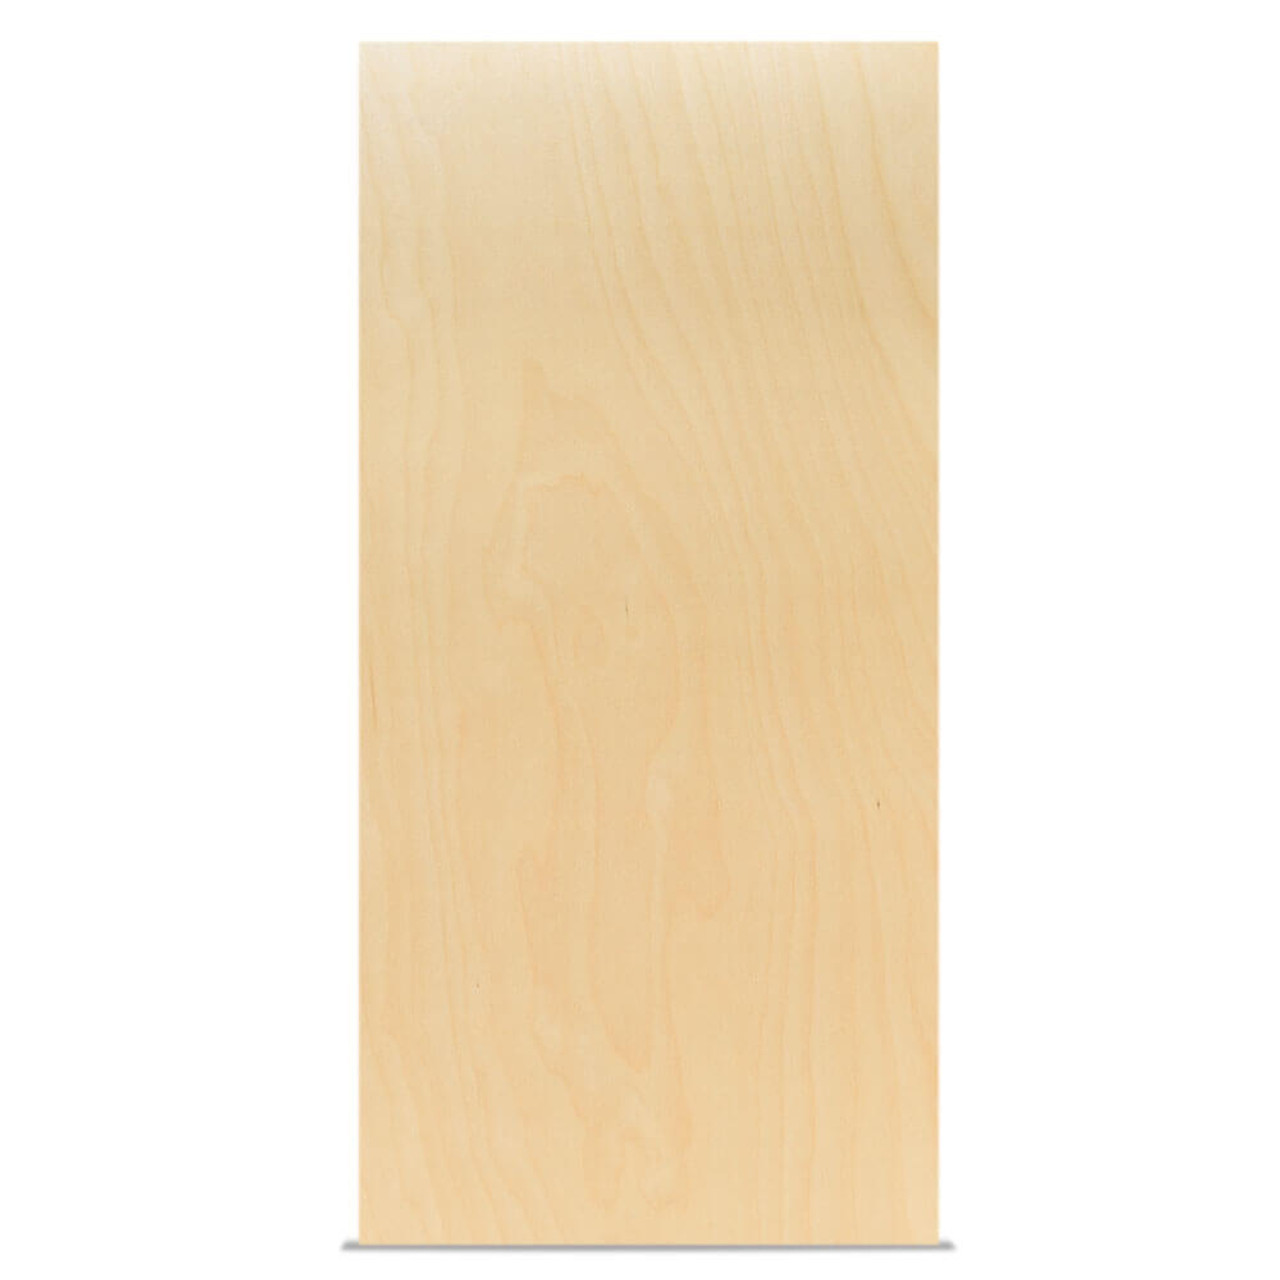 BALTIC BIRCH PLYWOOD 1/8 (3mm) BY APPROX 12 x 14 40 PIECES